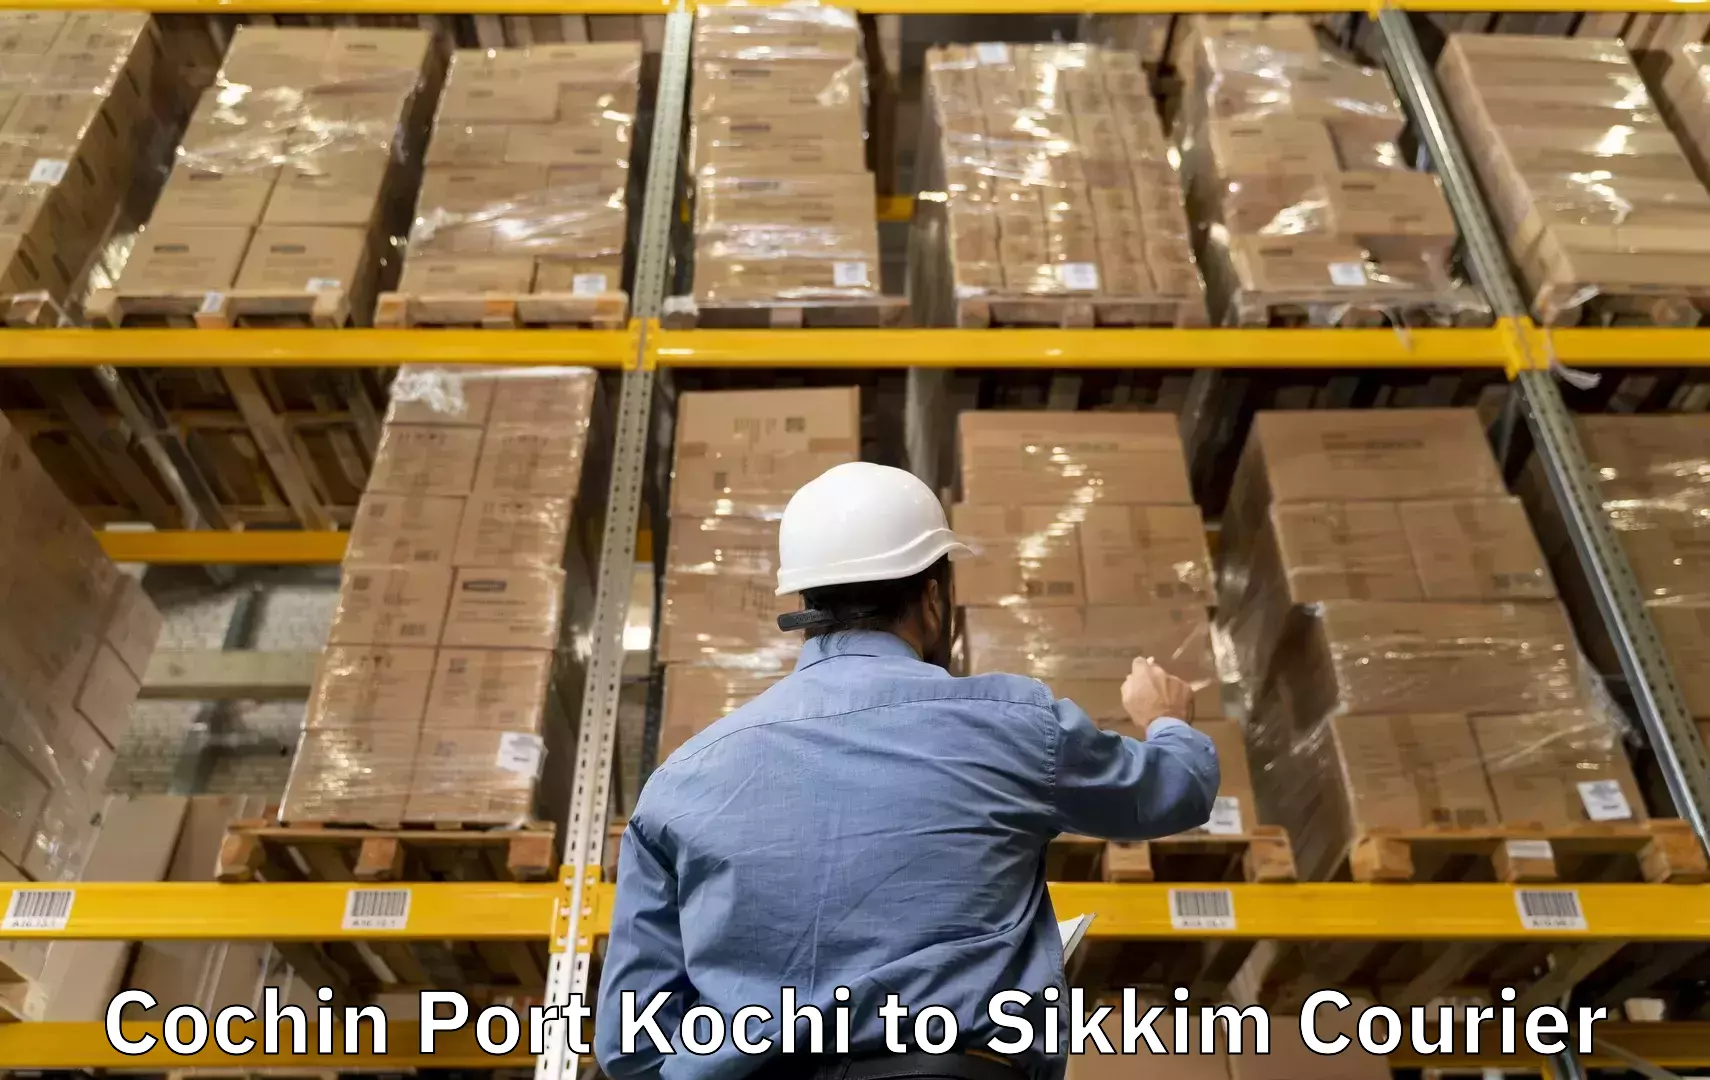 Baggage relocation service Cochin Port Kochi to East Sikkim